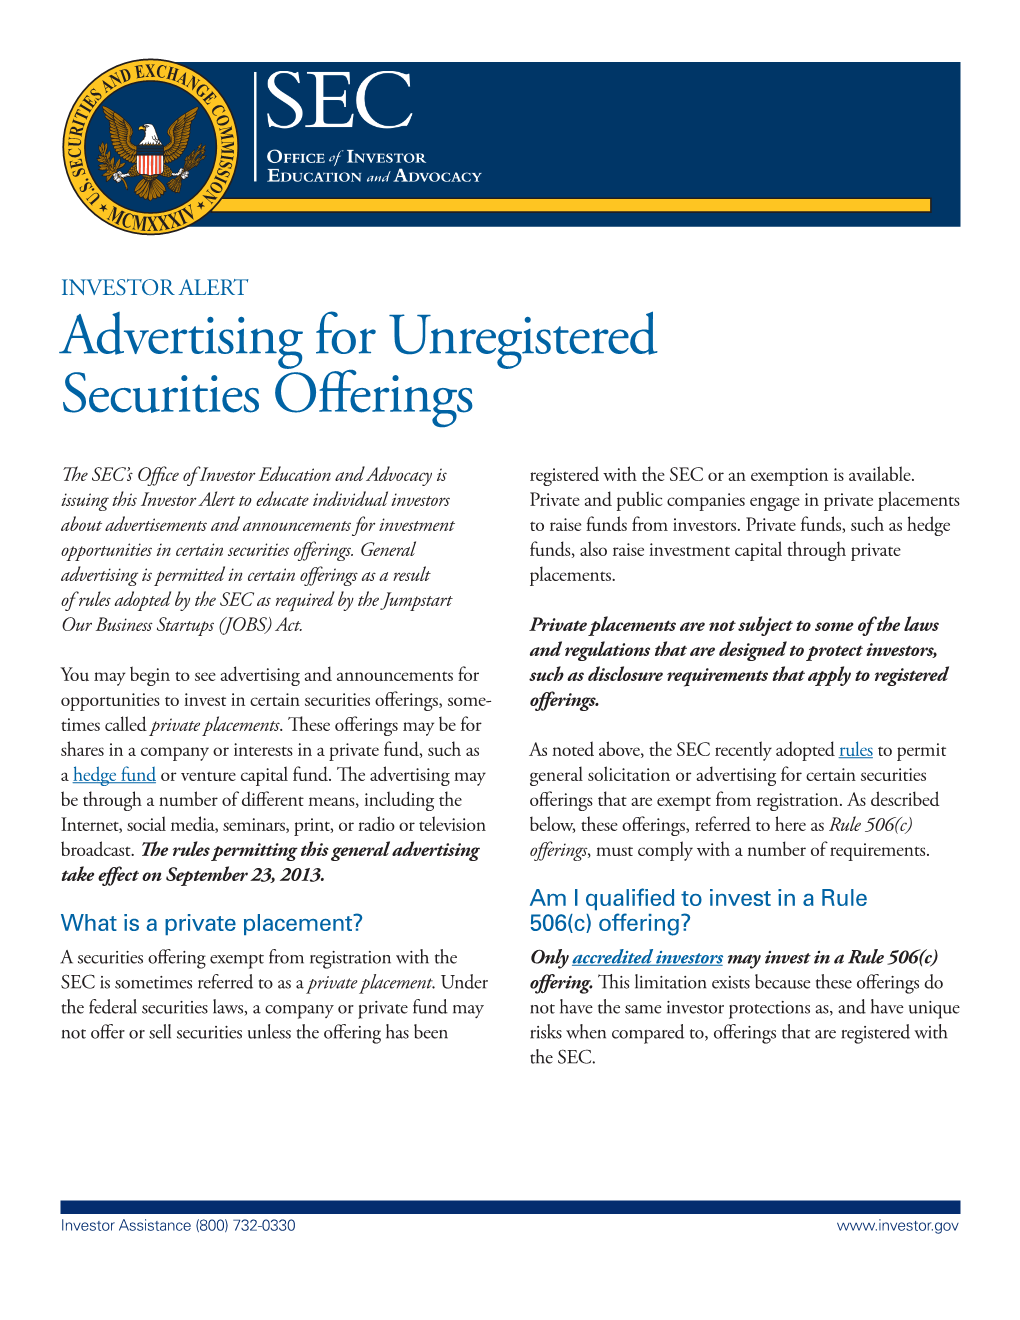 Advertising for Unregistered Securities Offerings